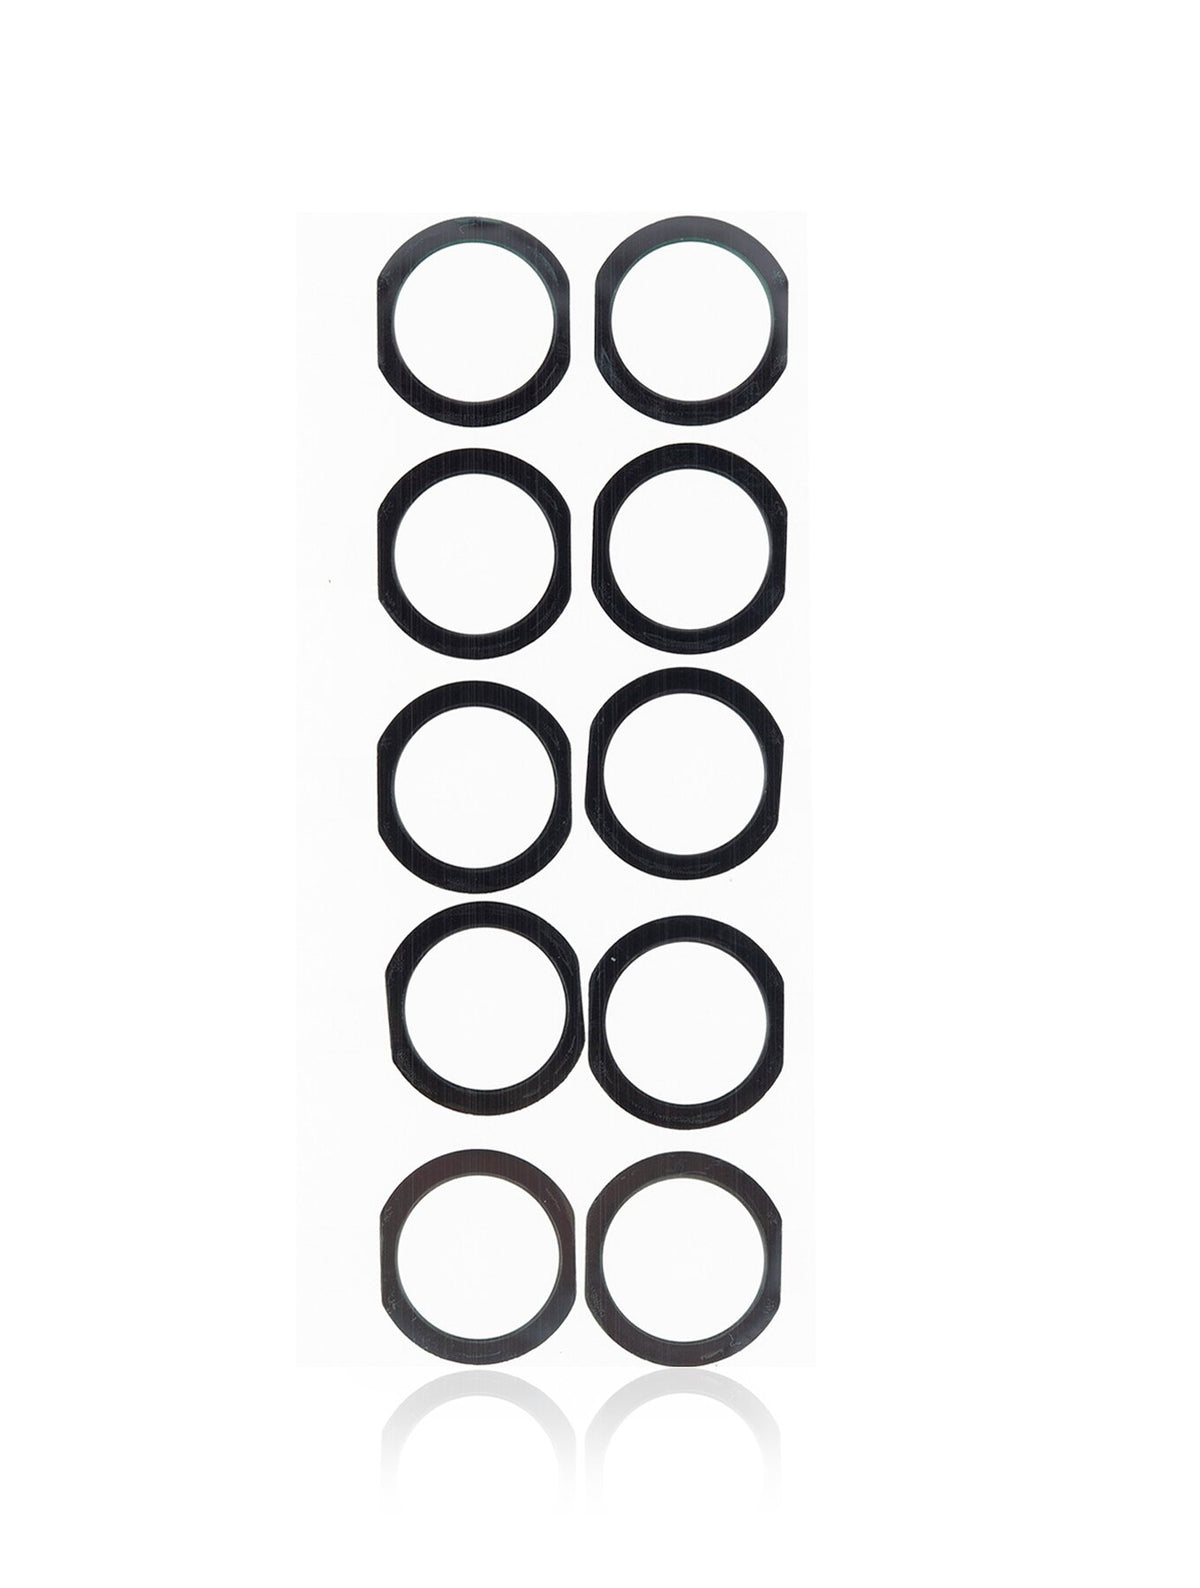 BLACK HOME BUTTON SPACER RING (10 PACK) COMPATIBLE FOR IPAD PRO 10.5" 1ST